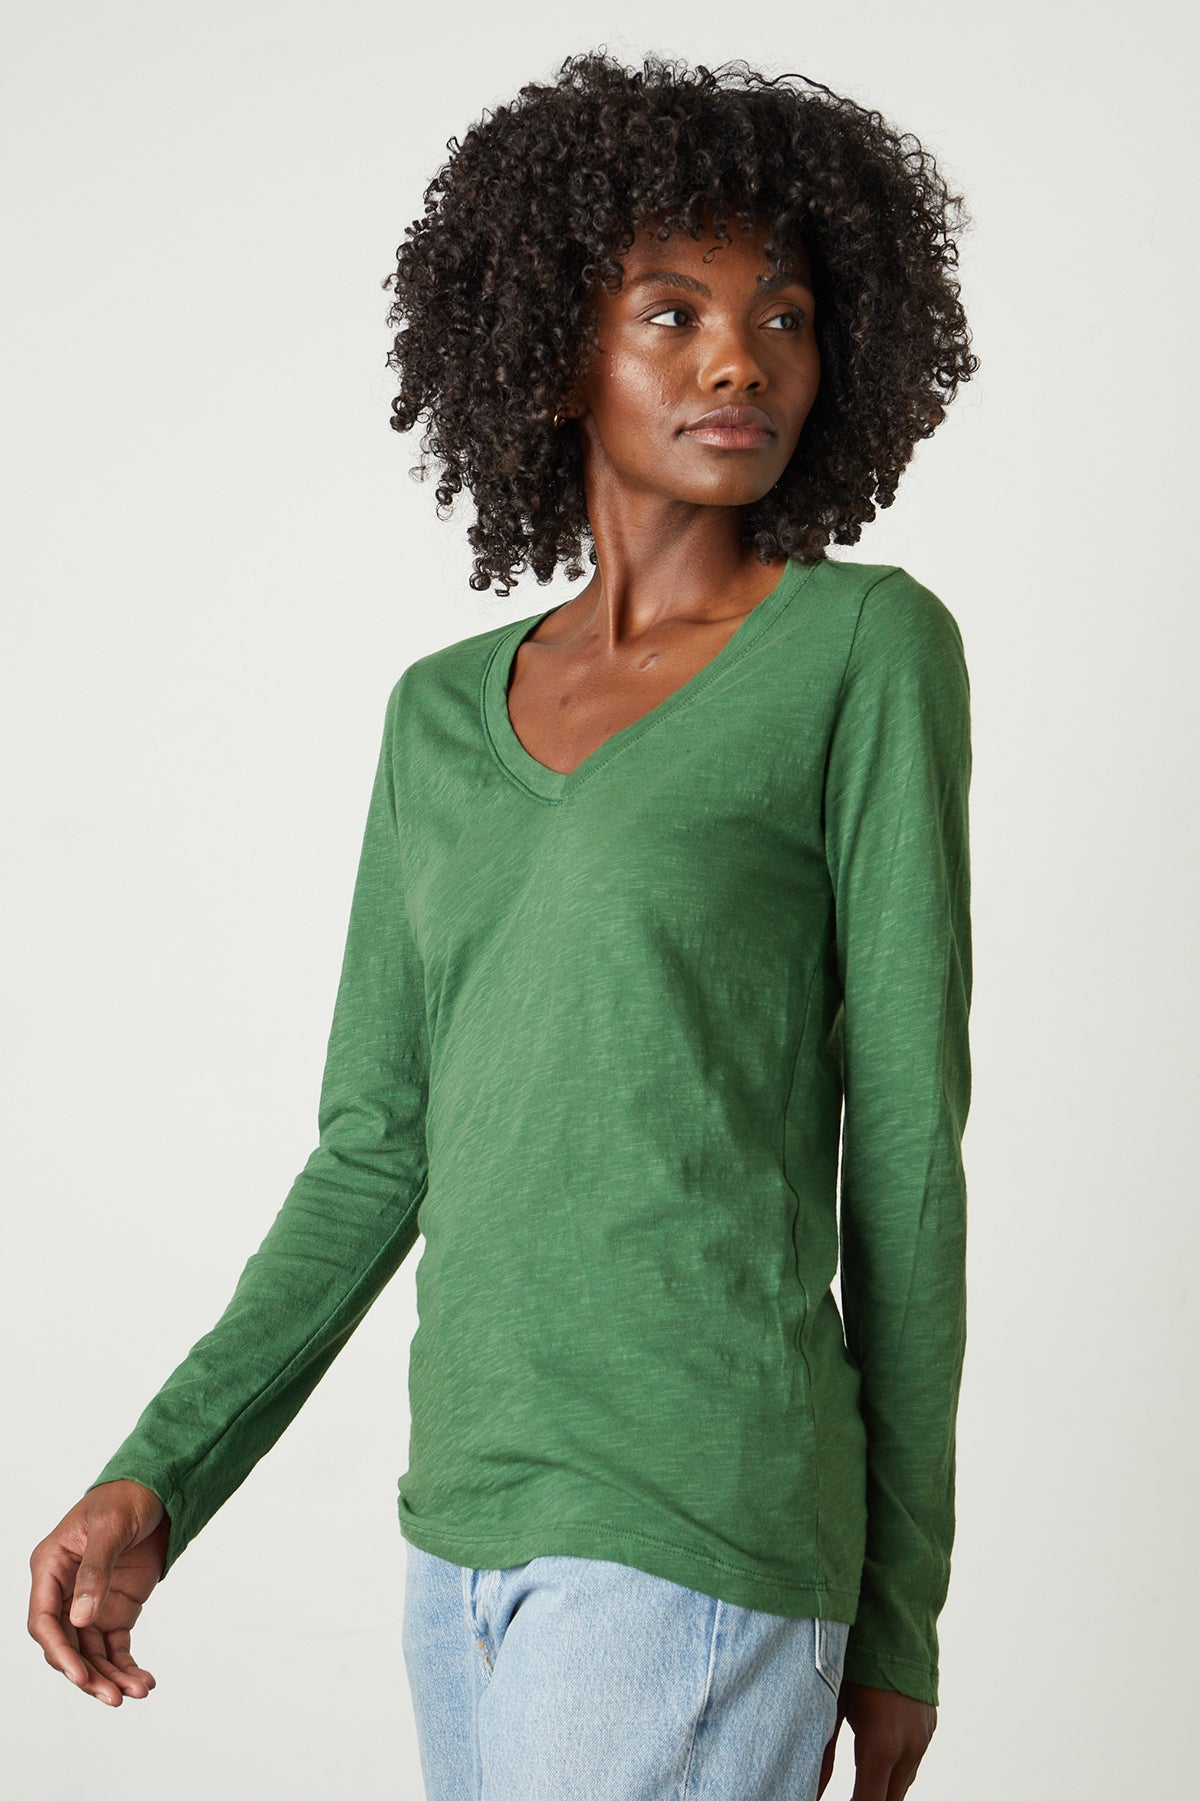   a woman wearing a green Blaire Original Slub Tee by Velvet by Graham & Spencer. 